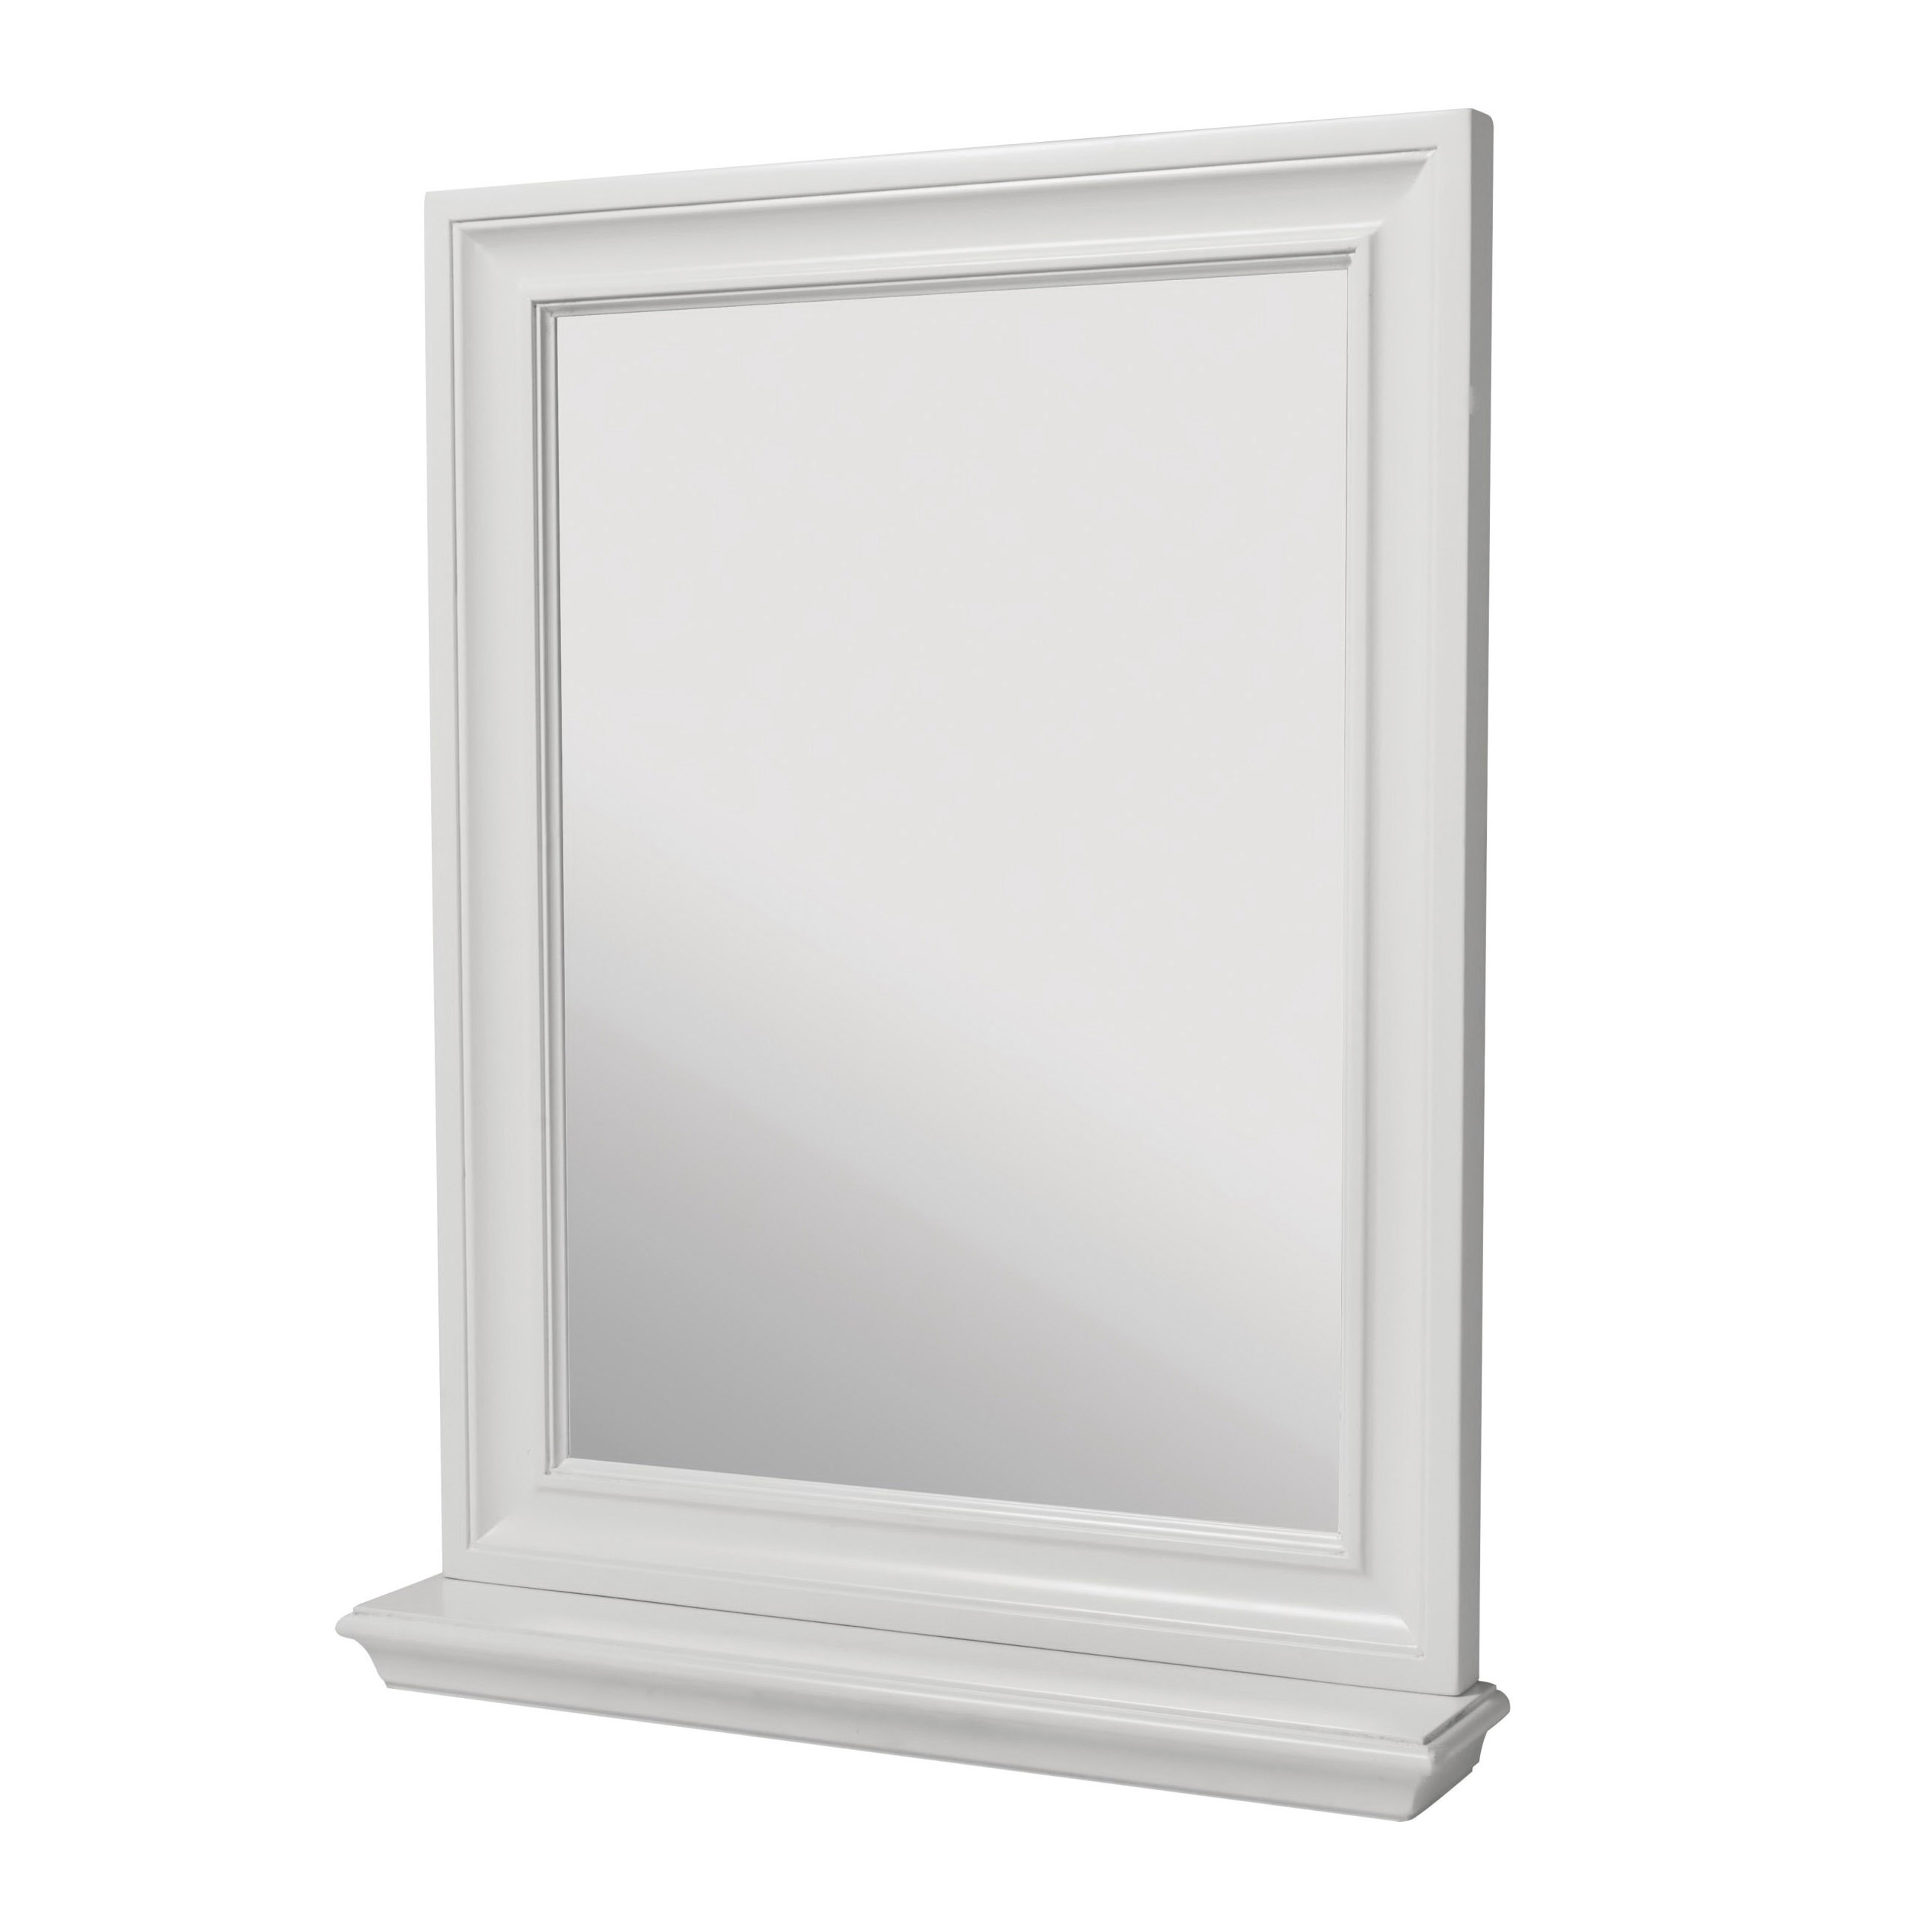 Cherie Series CHWM2430 Framed Mirror, Rectangular, 24 in W, 30 in H, Wood Frame, White Frame, Wall Mounting